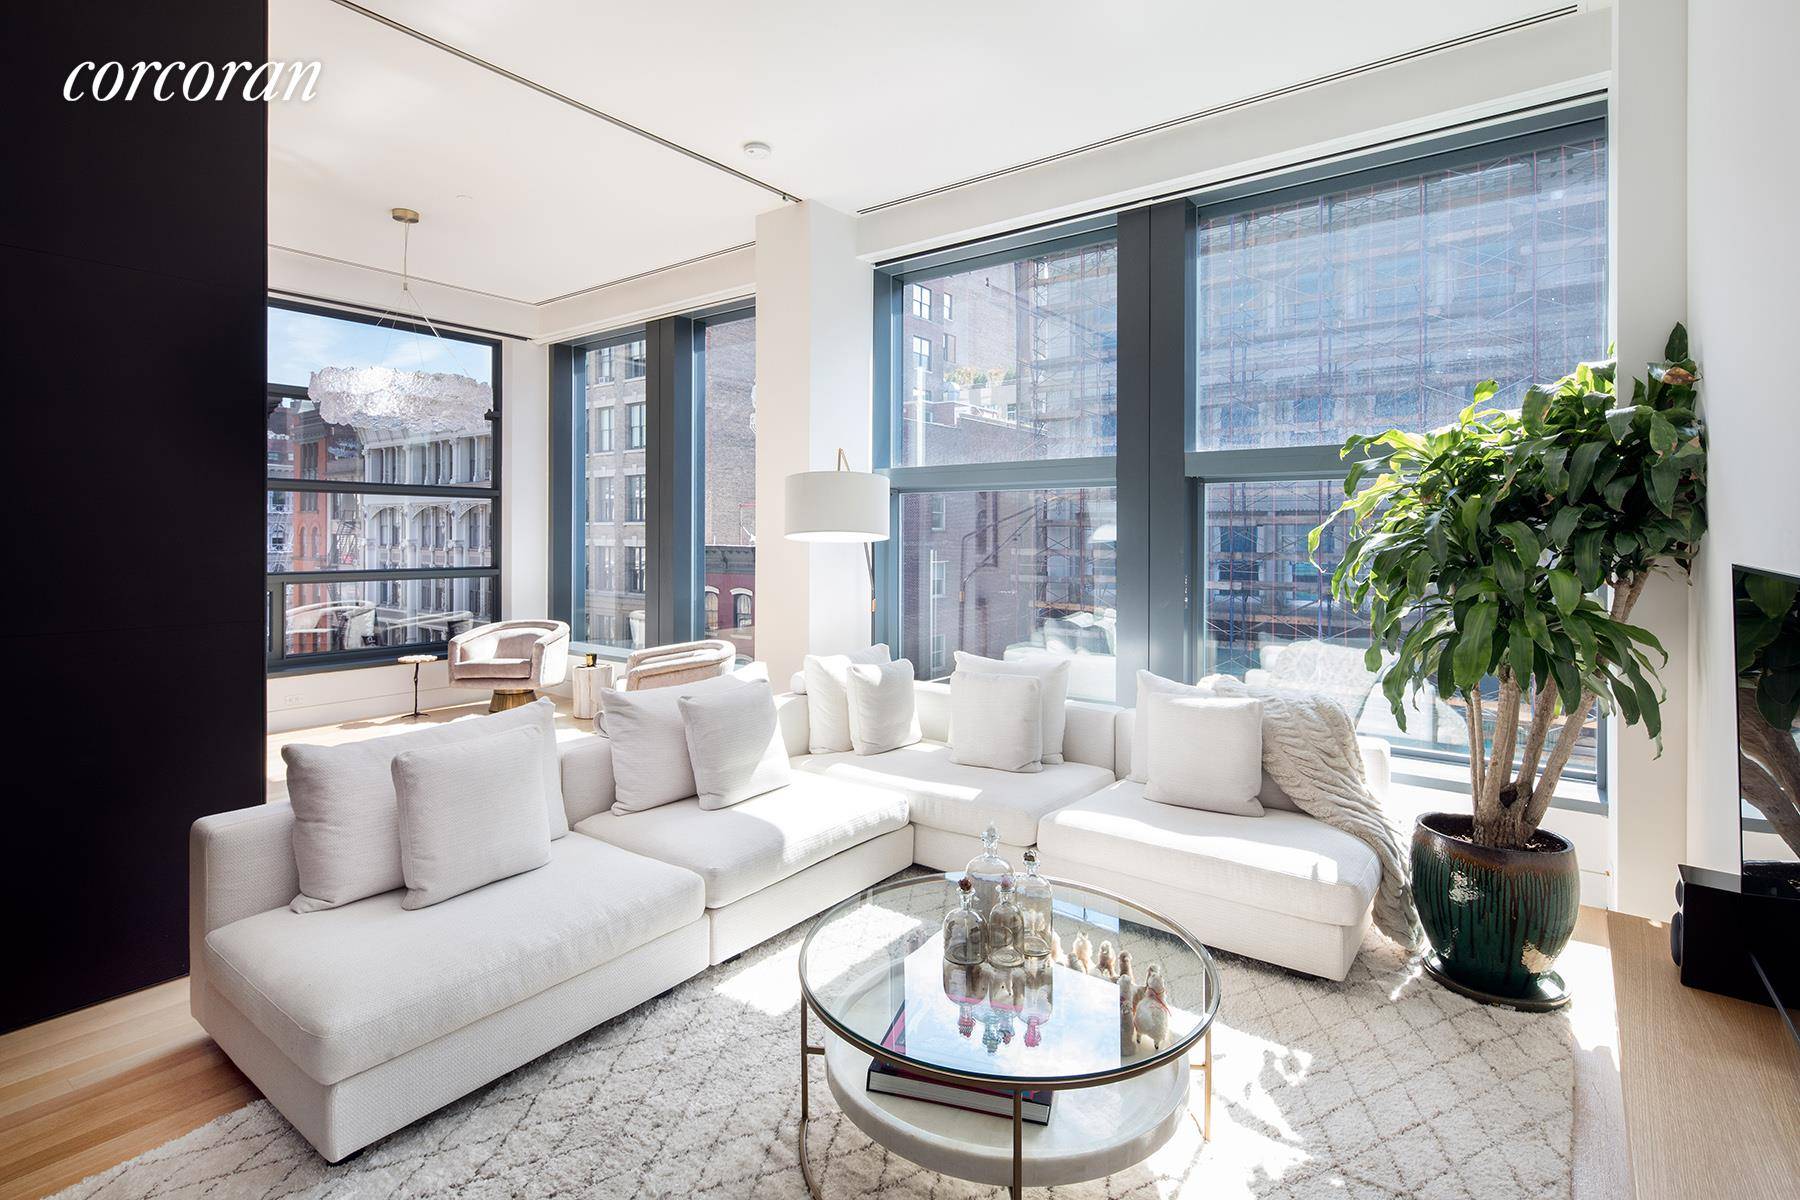 Expansive 2 bed 2 bath corner unit boasting 11A ceilings, floor to ceiling windows with motorized window panes and shades, white oak flooring, limitless custom cabinetry and an entertainers dream ...